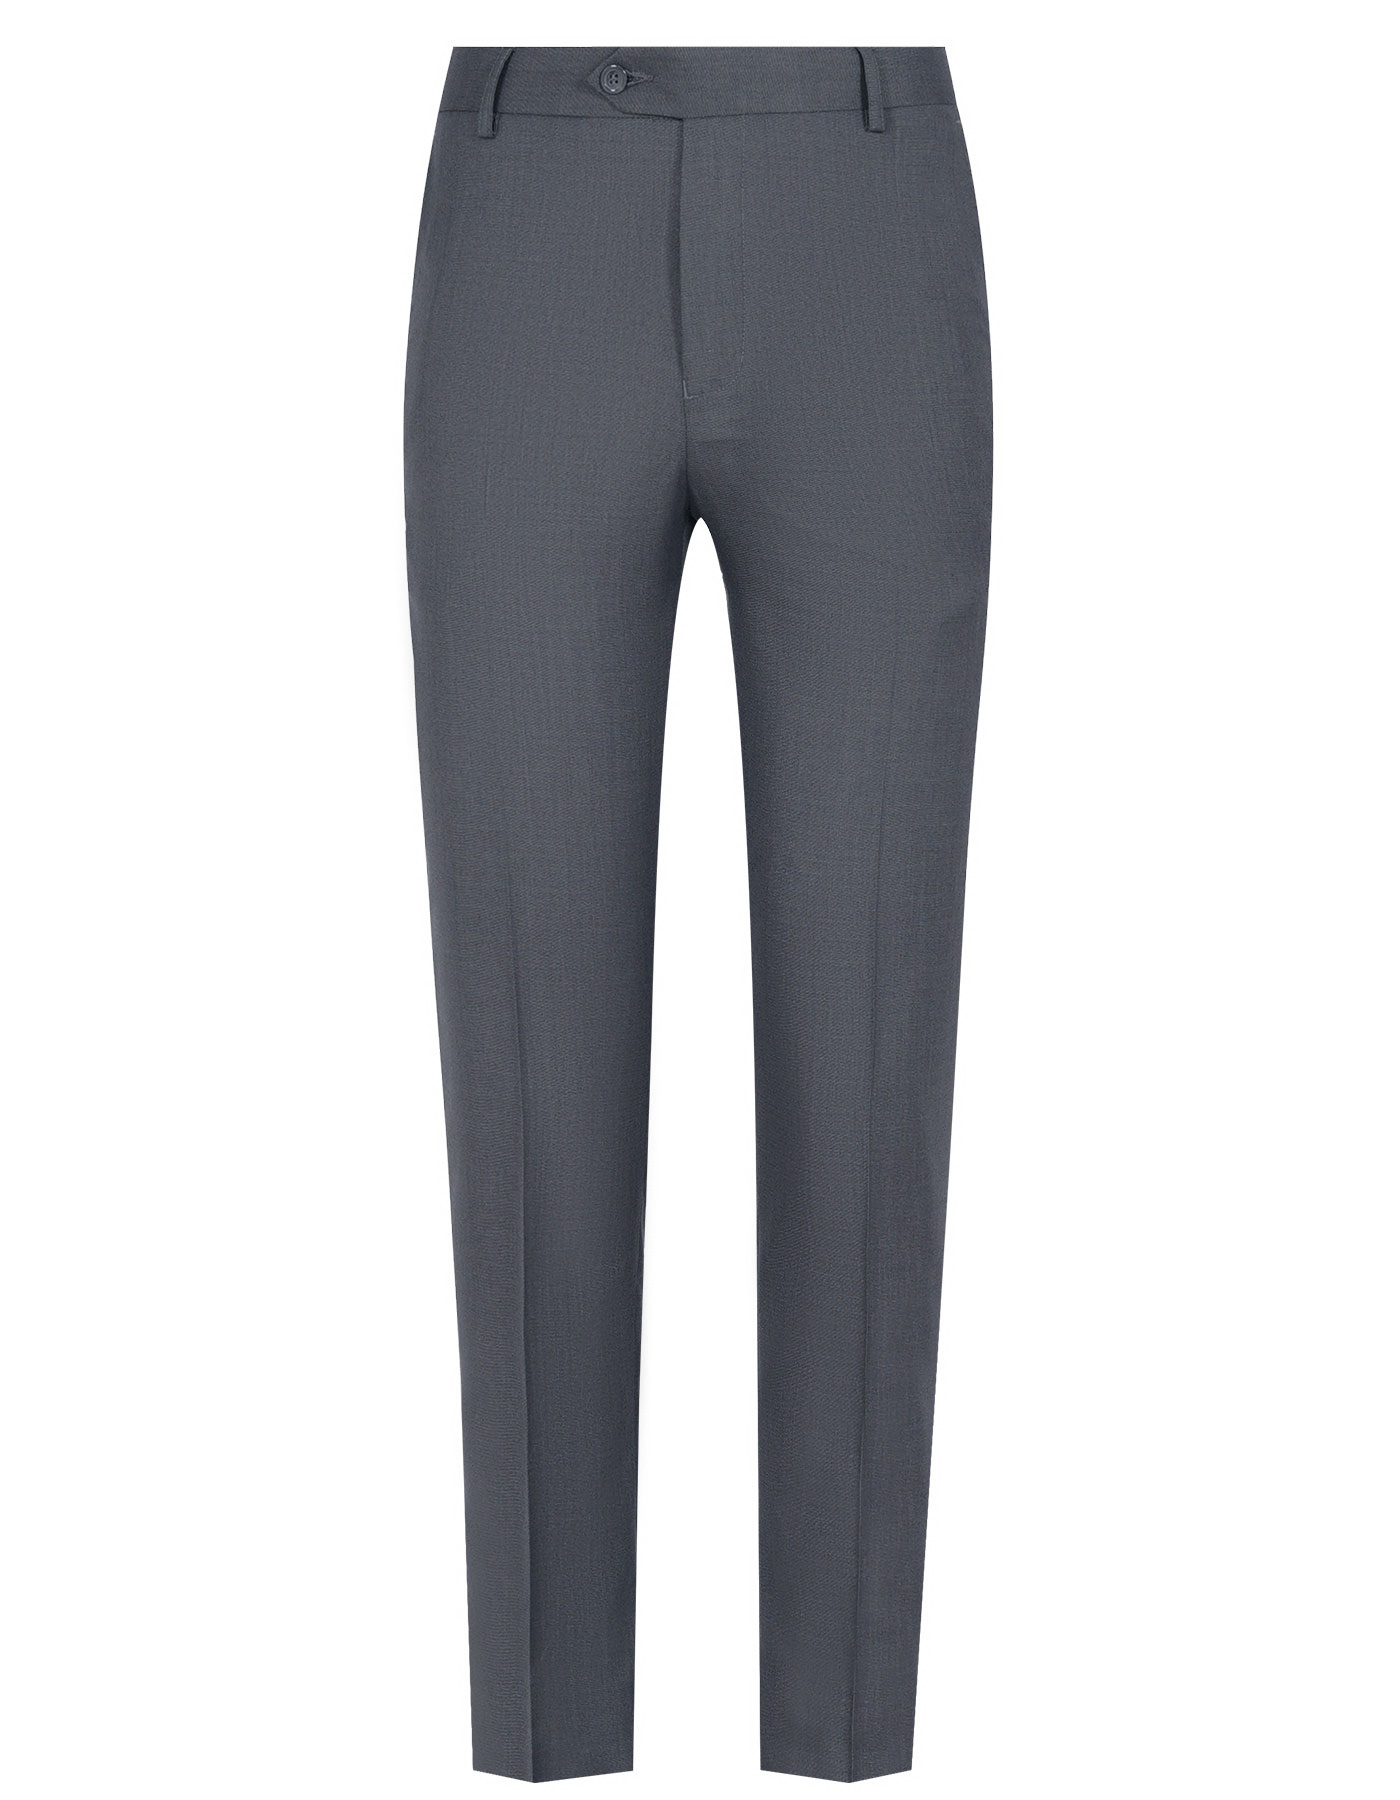 Charcoal Texture Formal Trouser for men